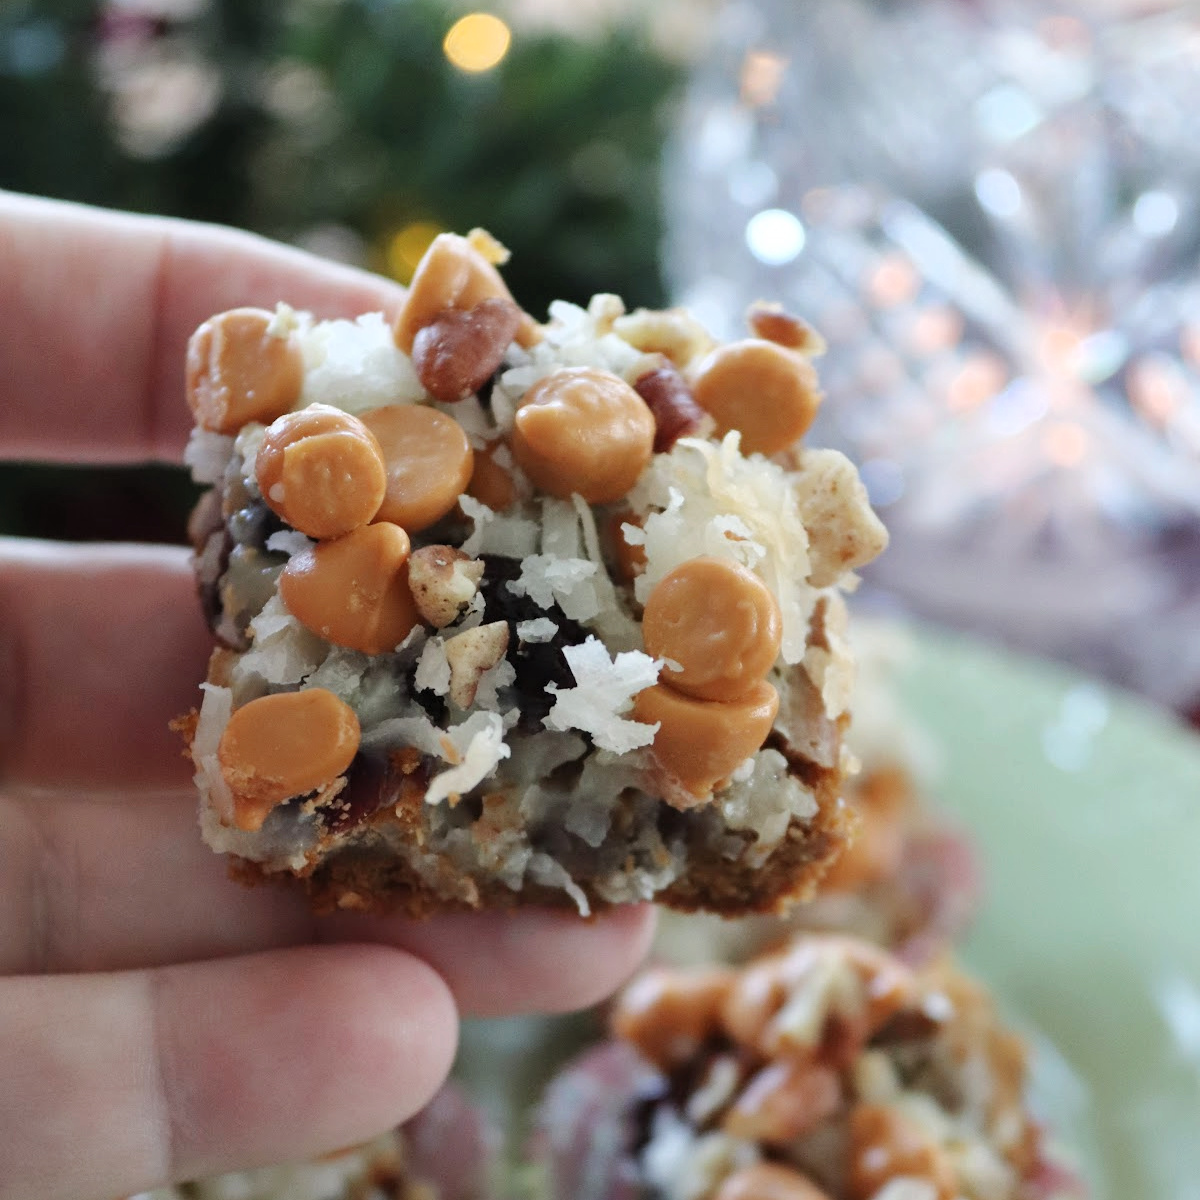 A gingerbread magic cookie bar being held.